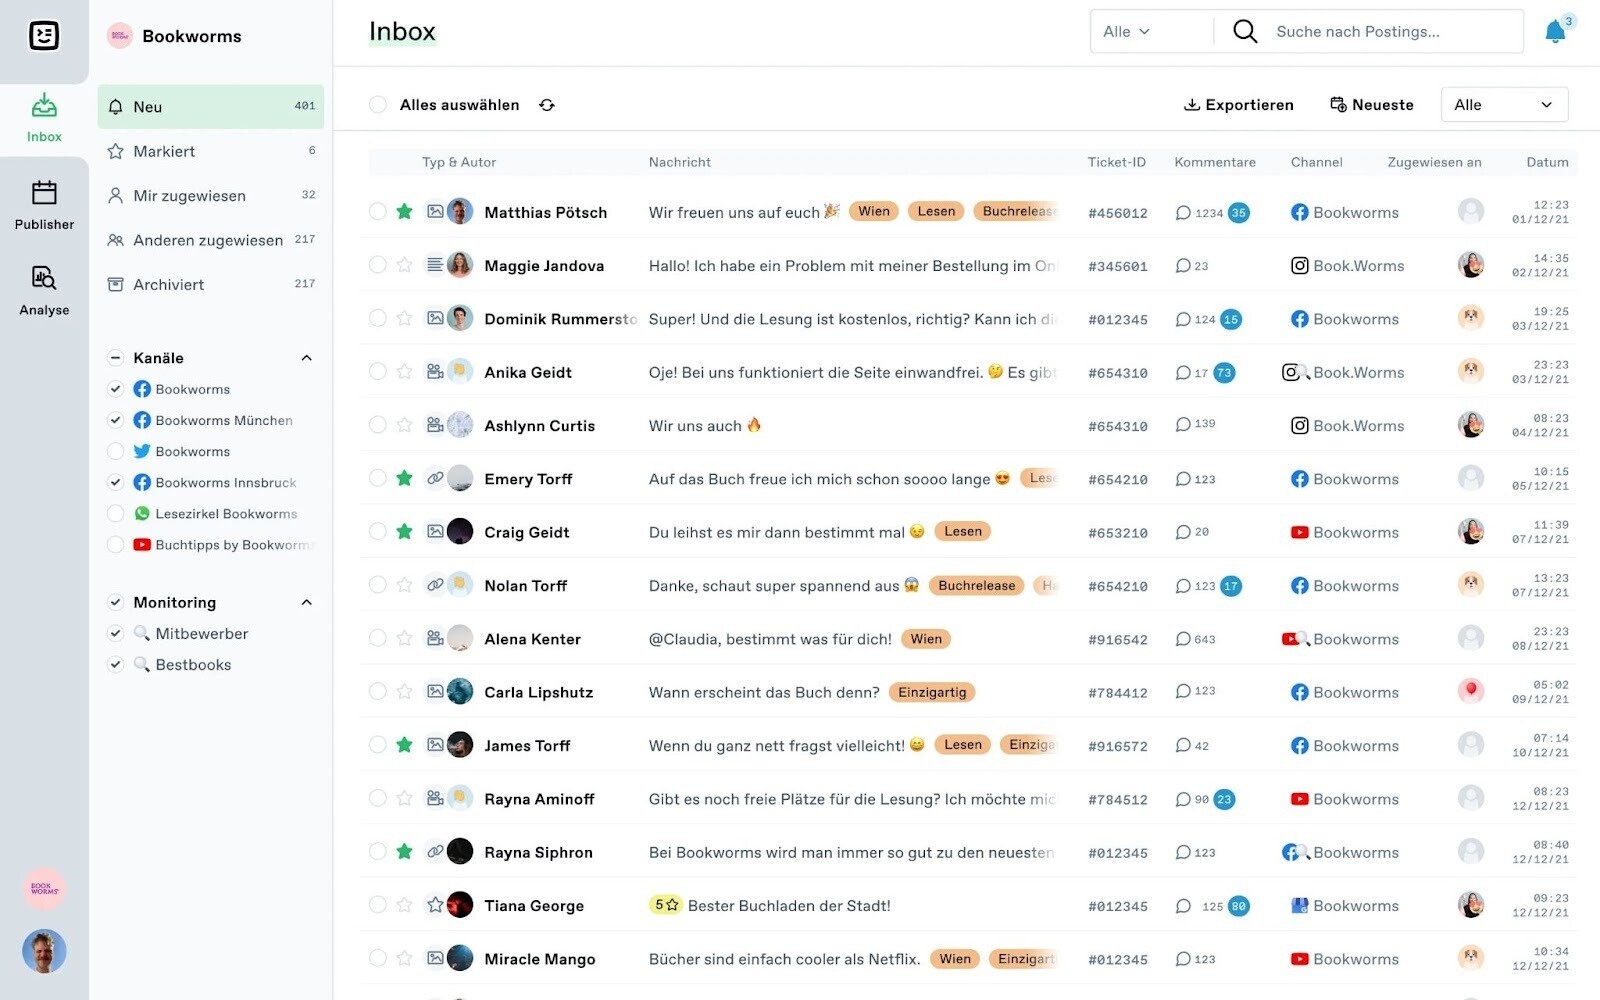 "Inbox" page in Swat.io